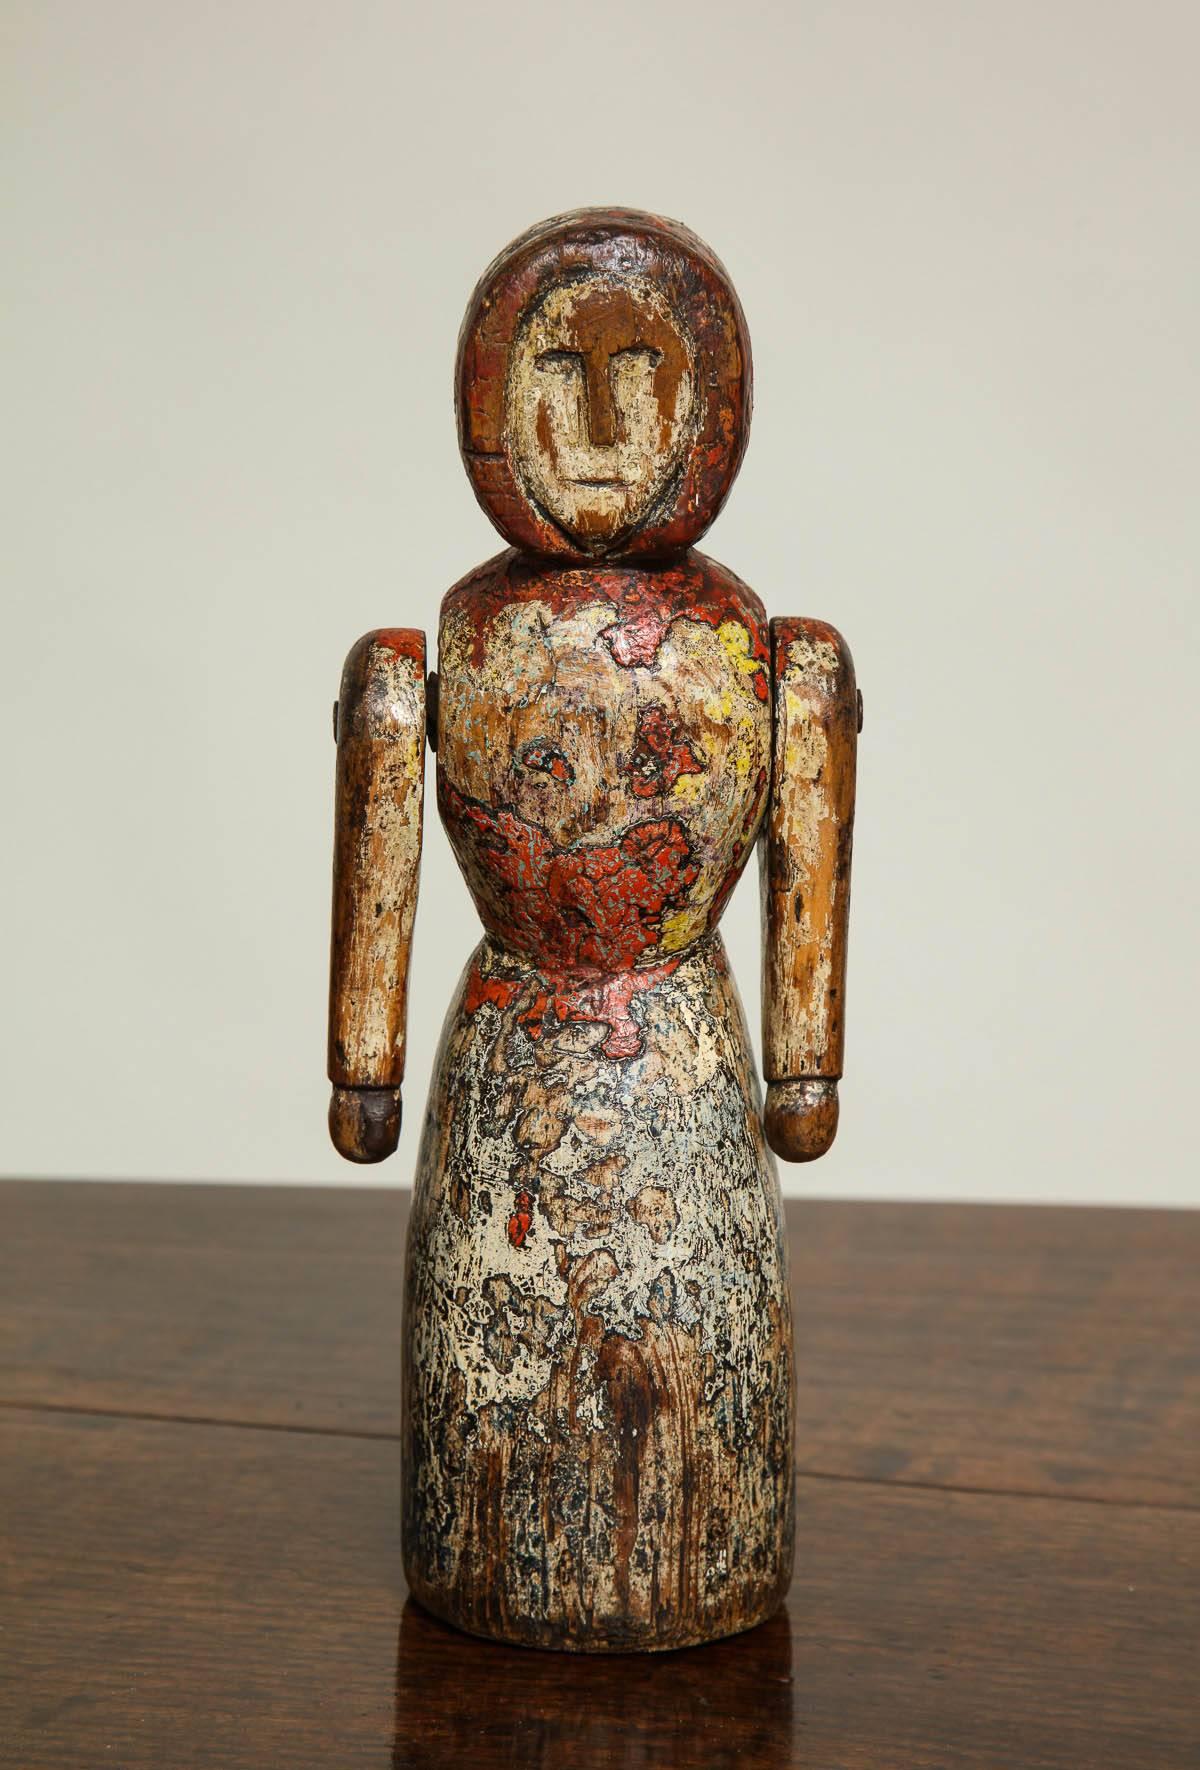 A carved wooden doll in the form of a simple bundled female figure, with moveable arms, showing traces of original paint.